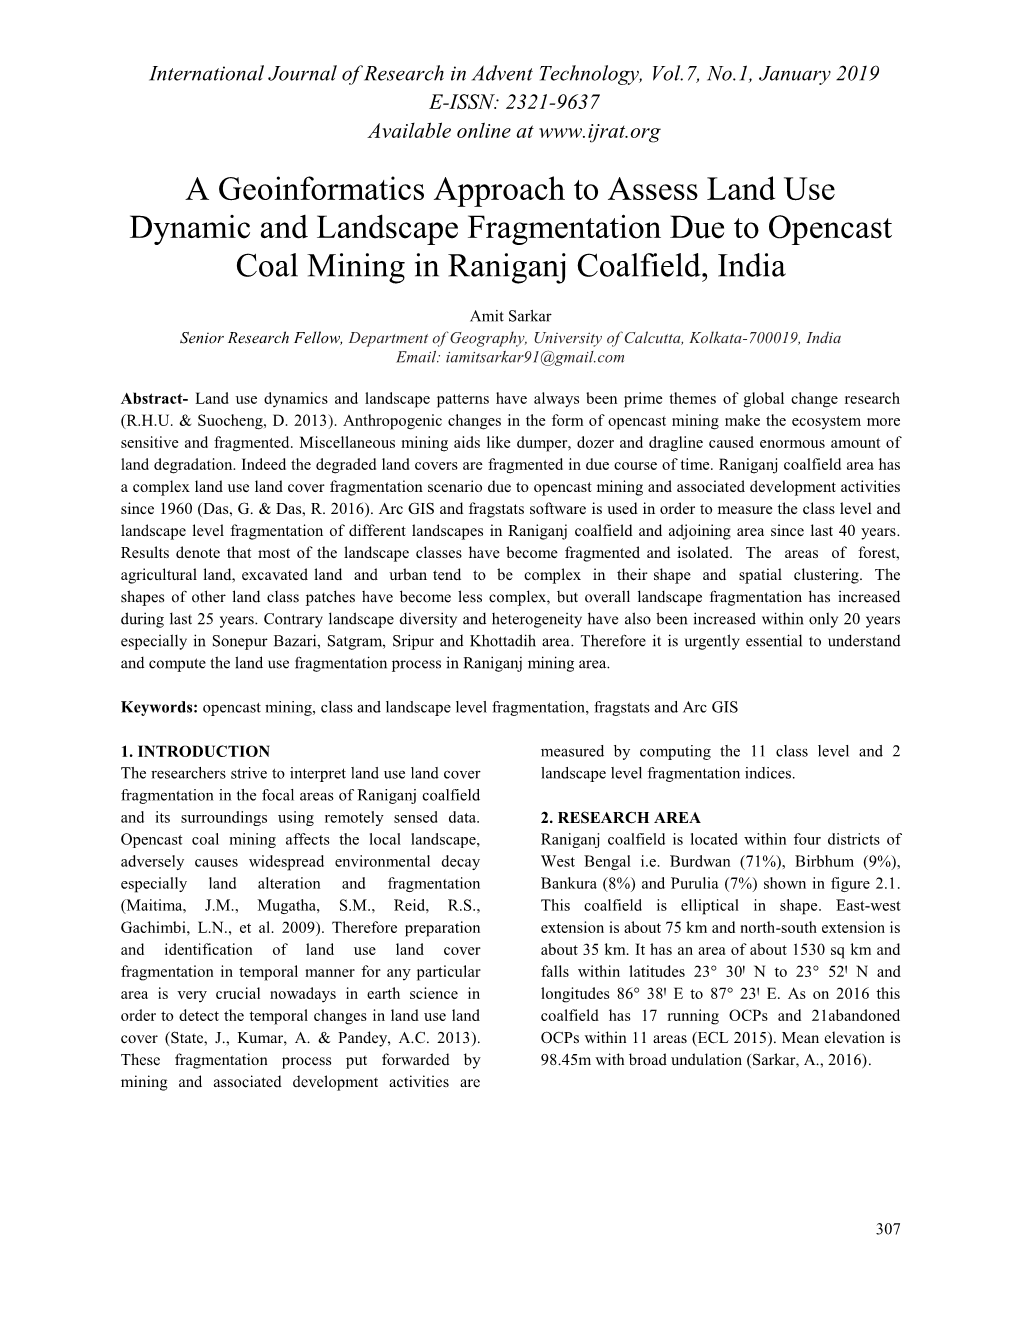 A Geoinformatics Approach to Assess Land Use Dynamic and Landscape Fragmentation Due to Opencast Coal Mining in Raniganj Coalfield, India